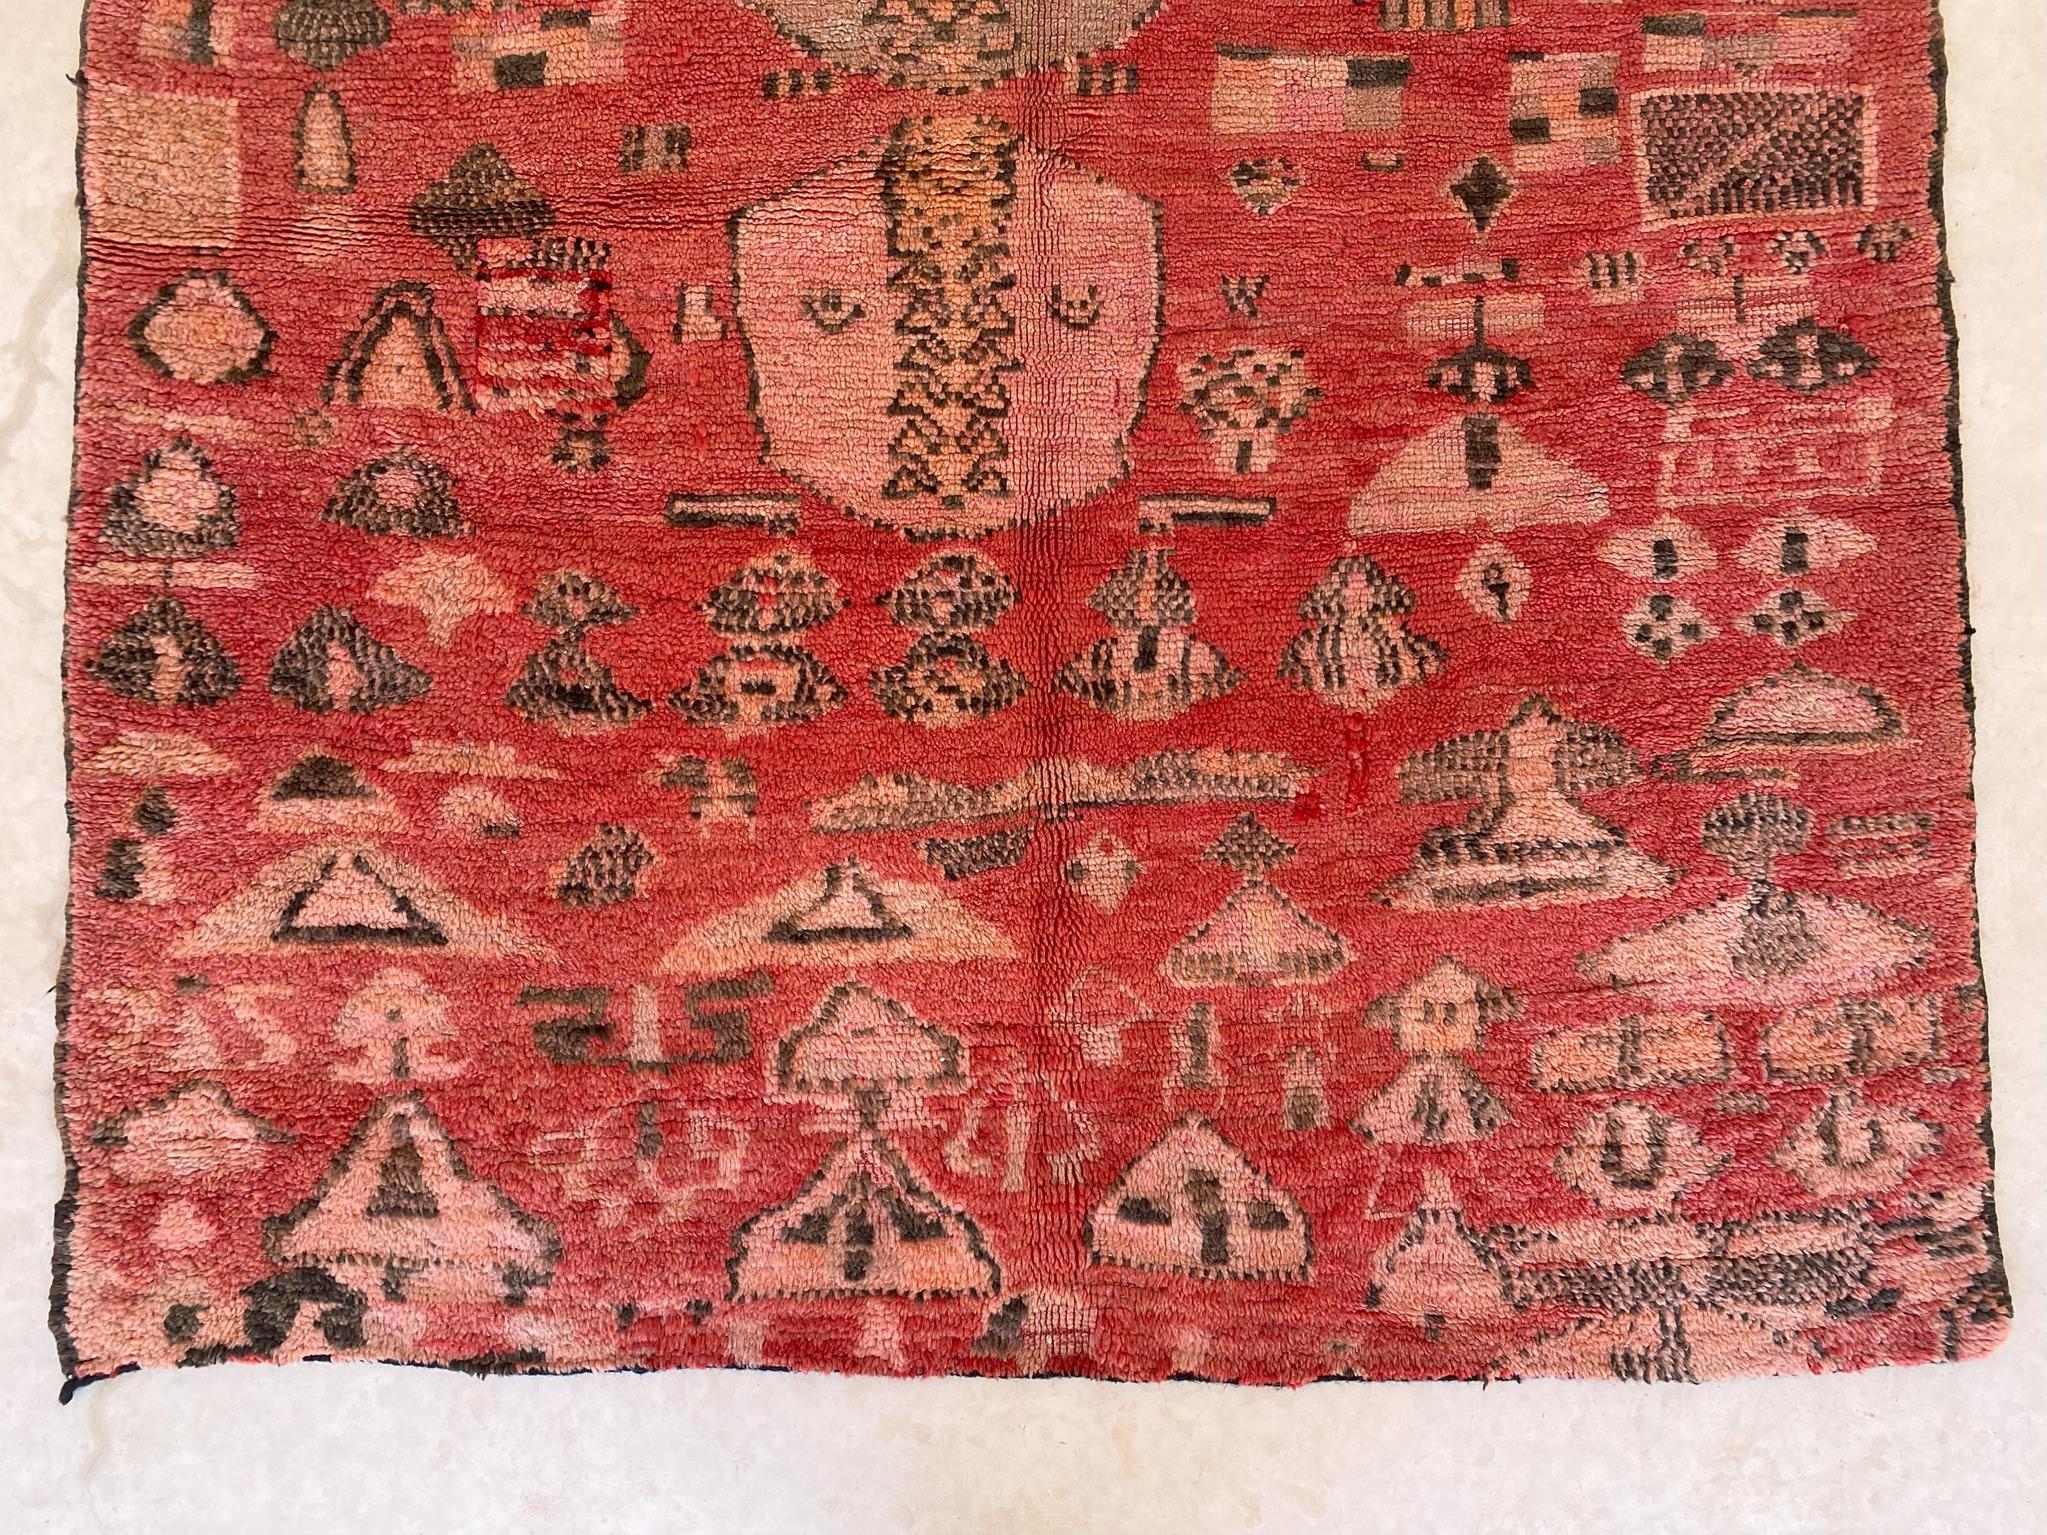 Collector Moroccan Rehamna rug - Red/pink - 5.8x8.6feet / 177x264cm In Good Condition For Sale In Marrakech, MA